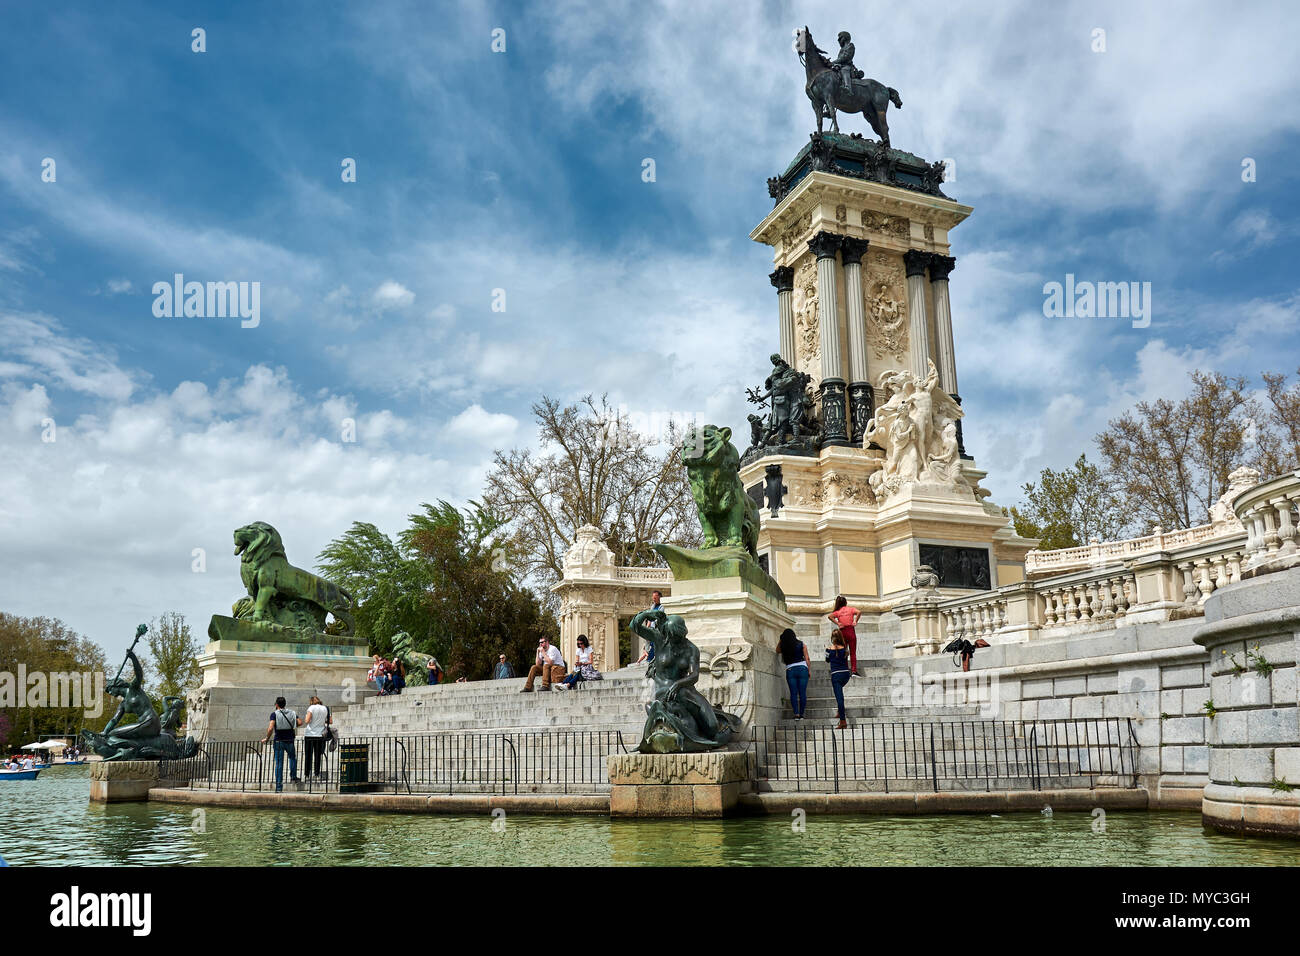 MADRID, SPAIN - APRIL 23, 2018: Close view of the Monument to the spanish king Alfonso XII in the Park of Good Retirement (Parque del Buen Retiro) Stock Photo